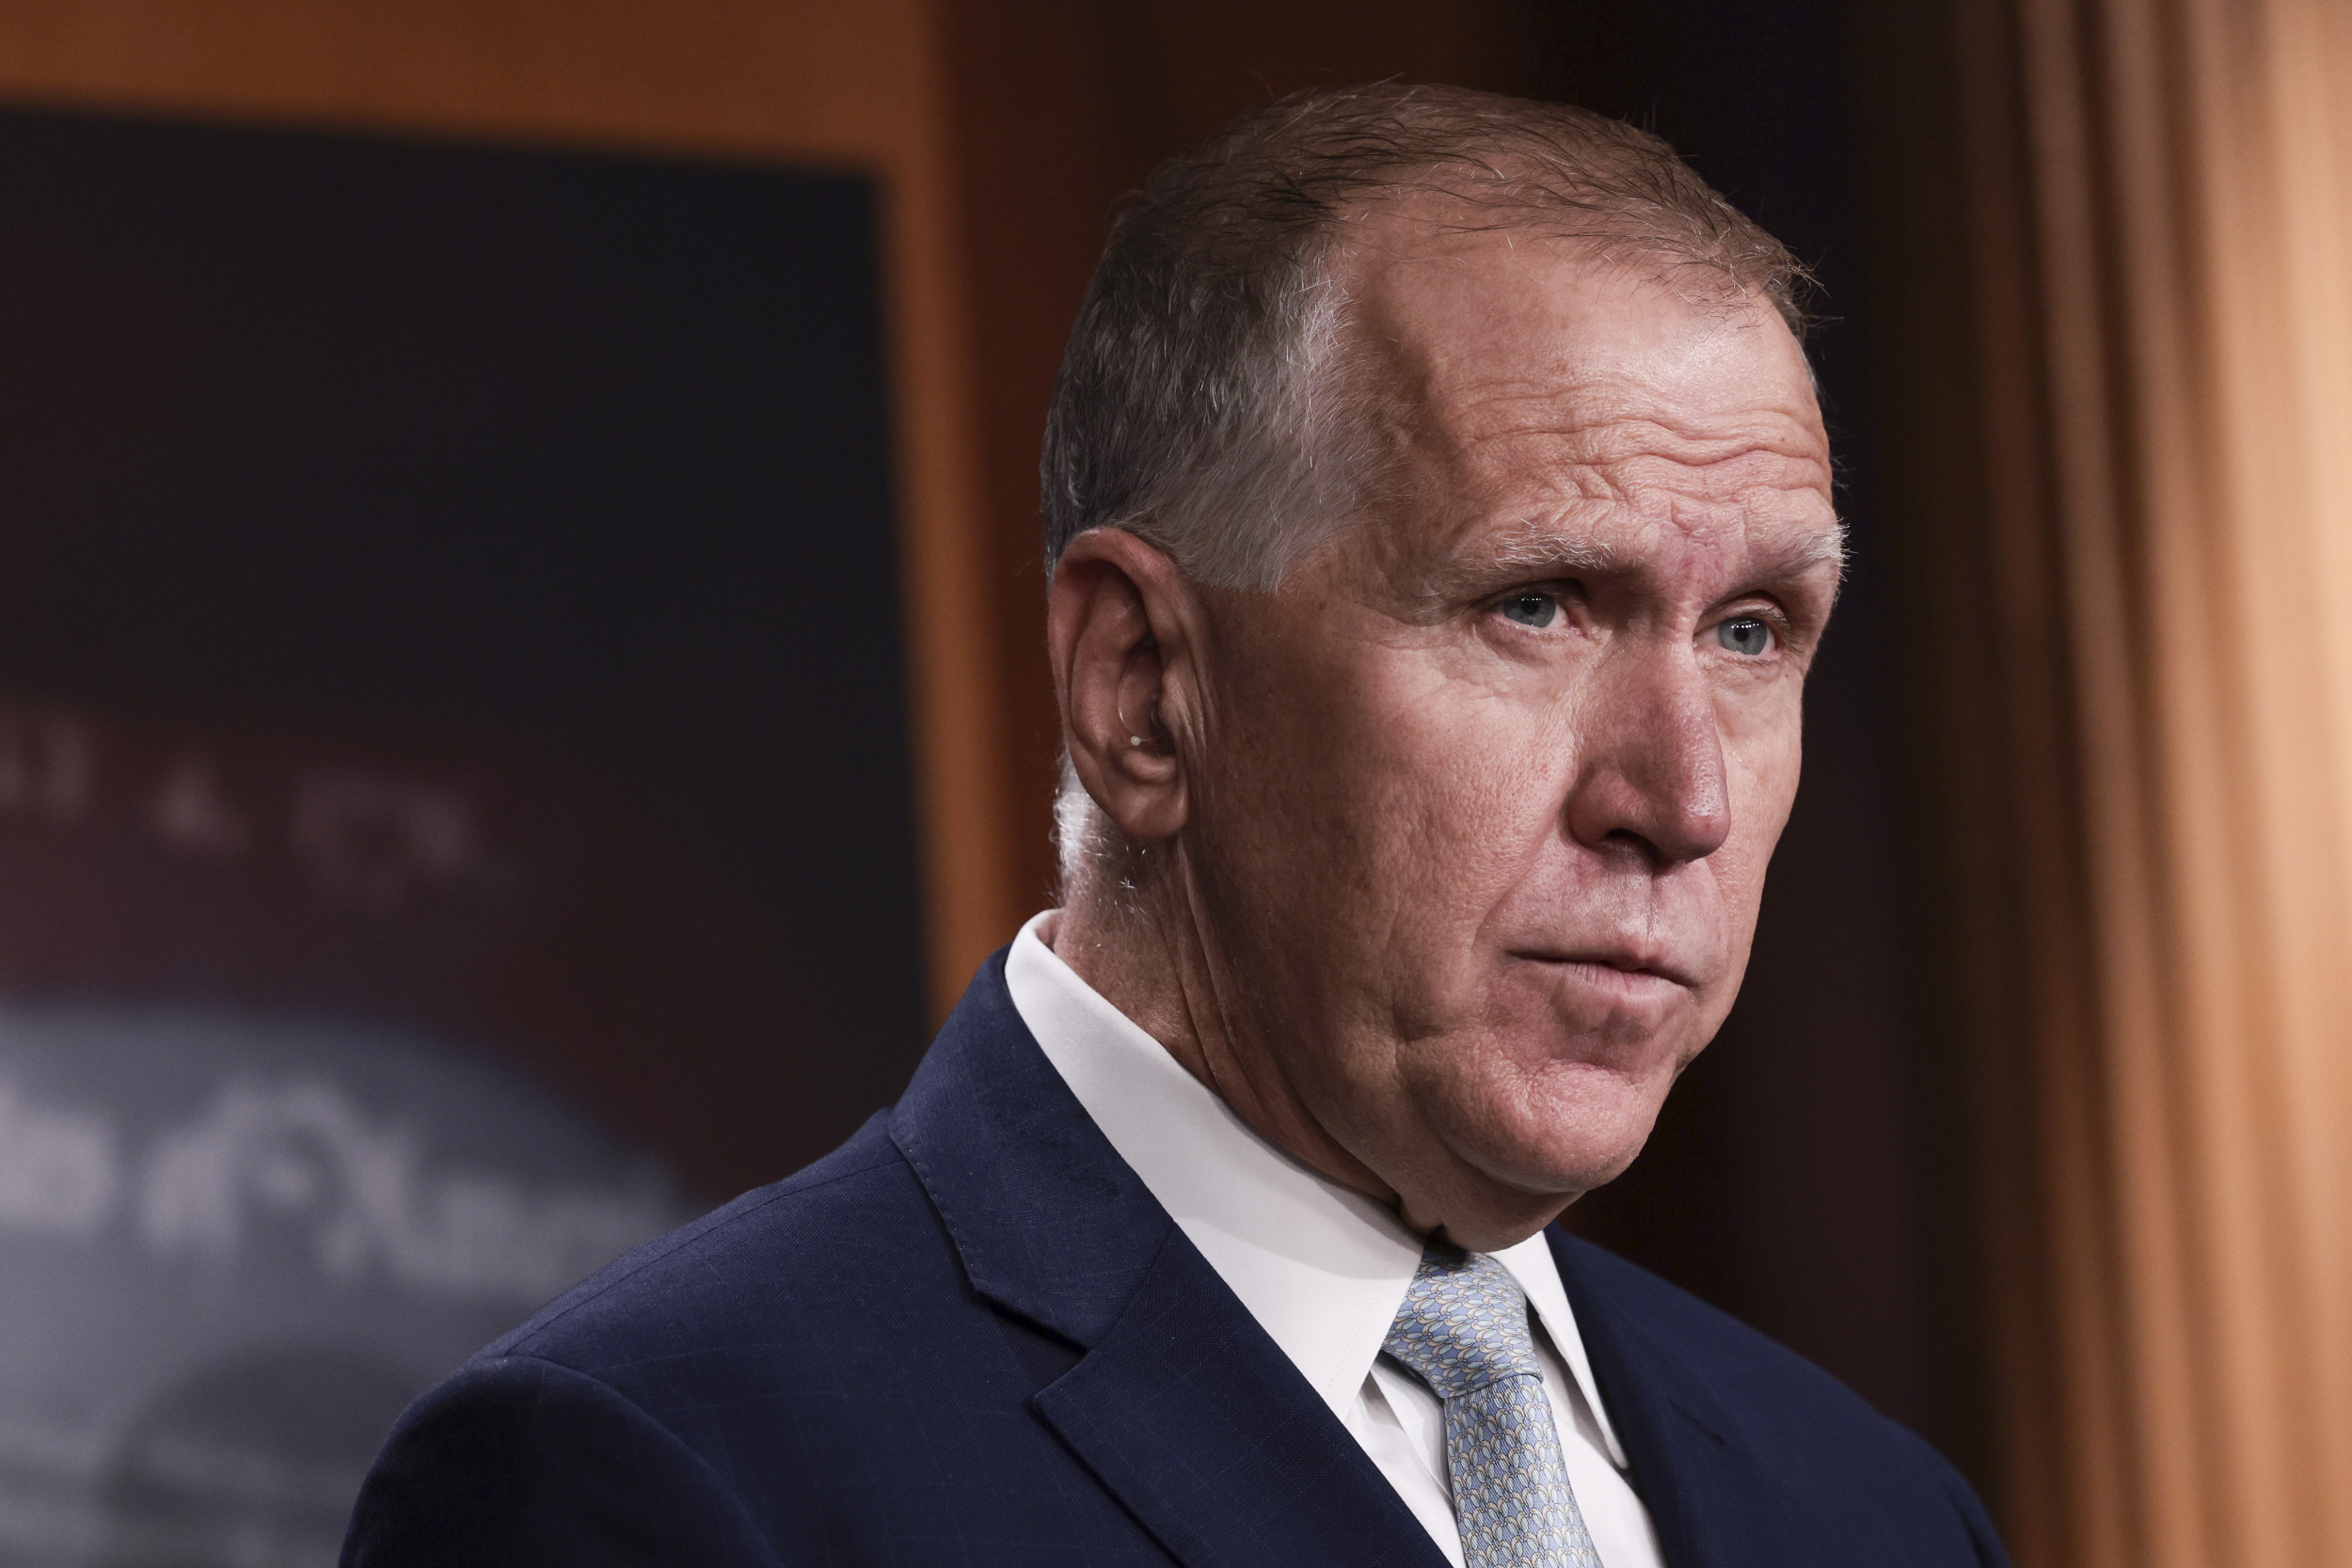 Now-Deleted Tweet From Senator Thom Tillis Confuses His Stance on Protecting the 'Unborn'